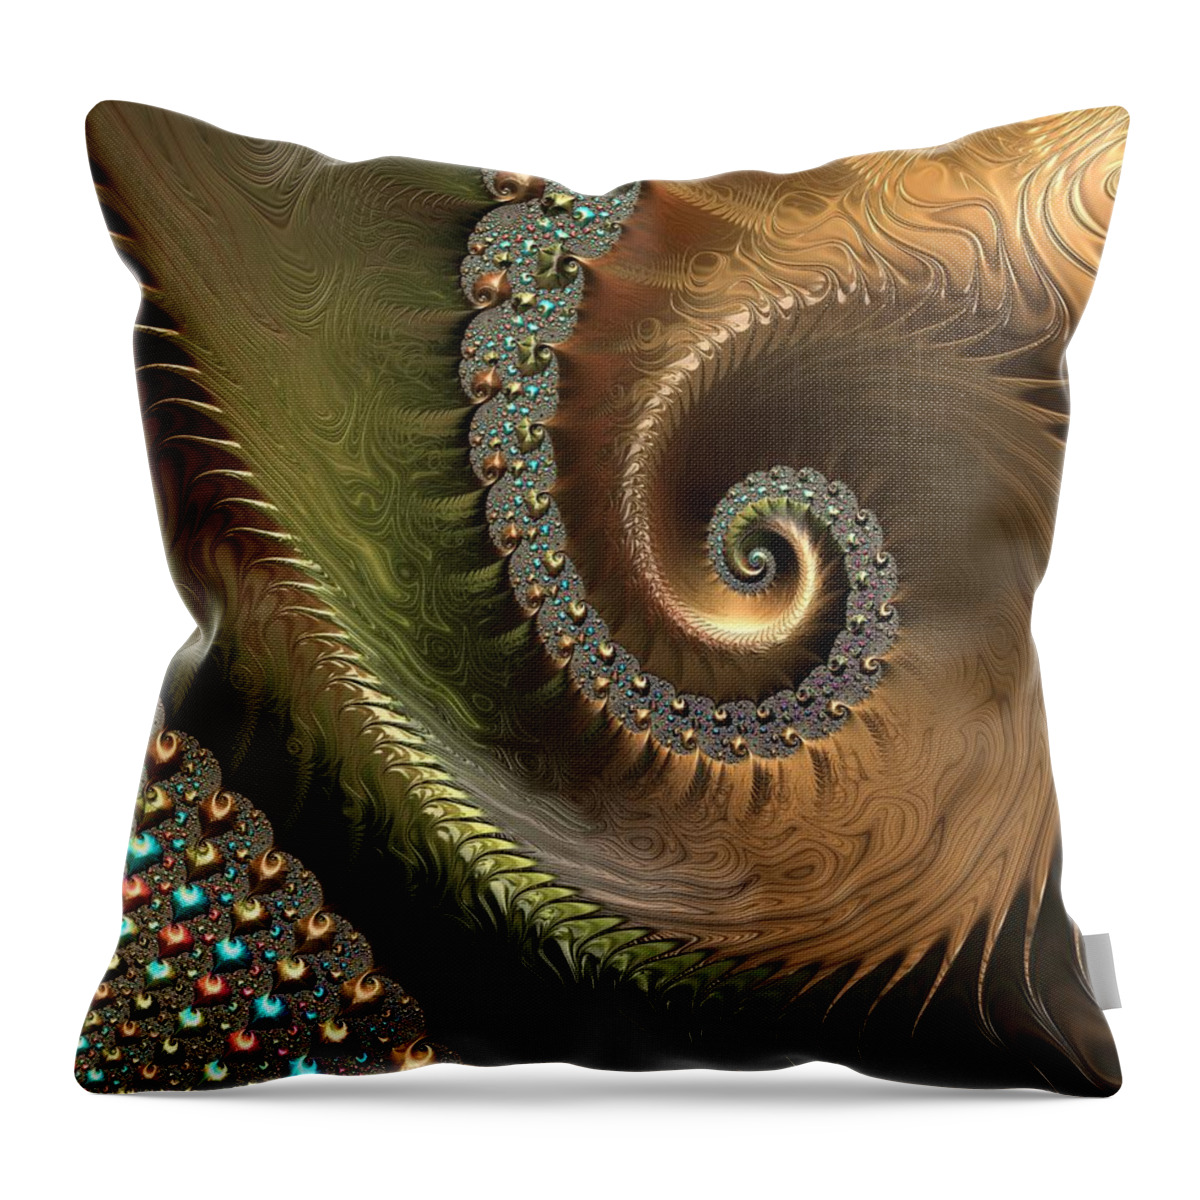 Jewel And Spiral Abstract Throw Pillow featuring the digital art Jewel and Spiral Abstract by Marianna Mills